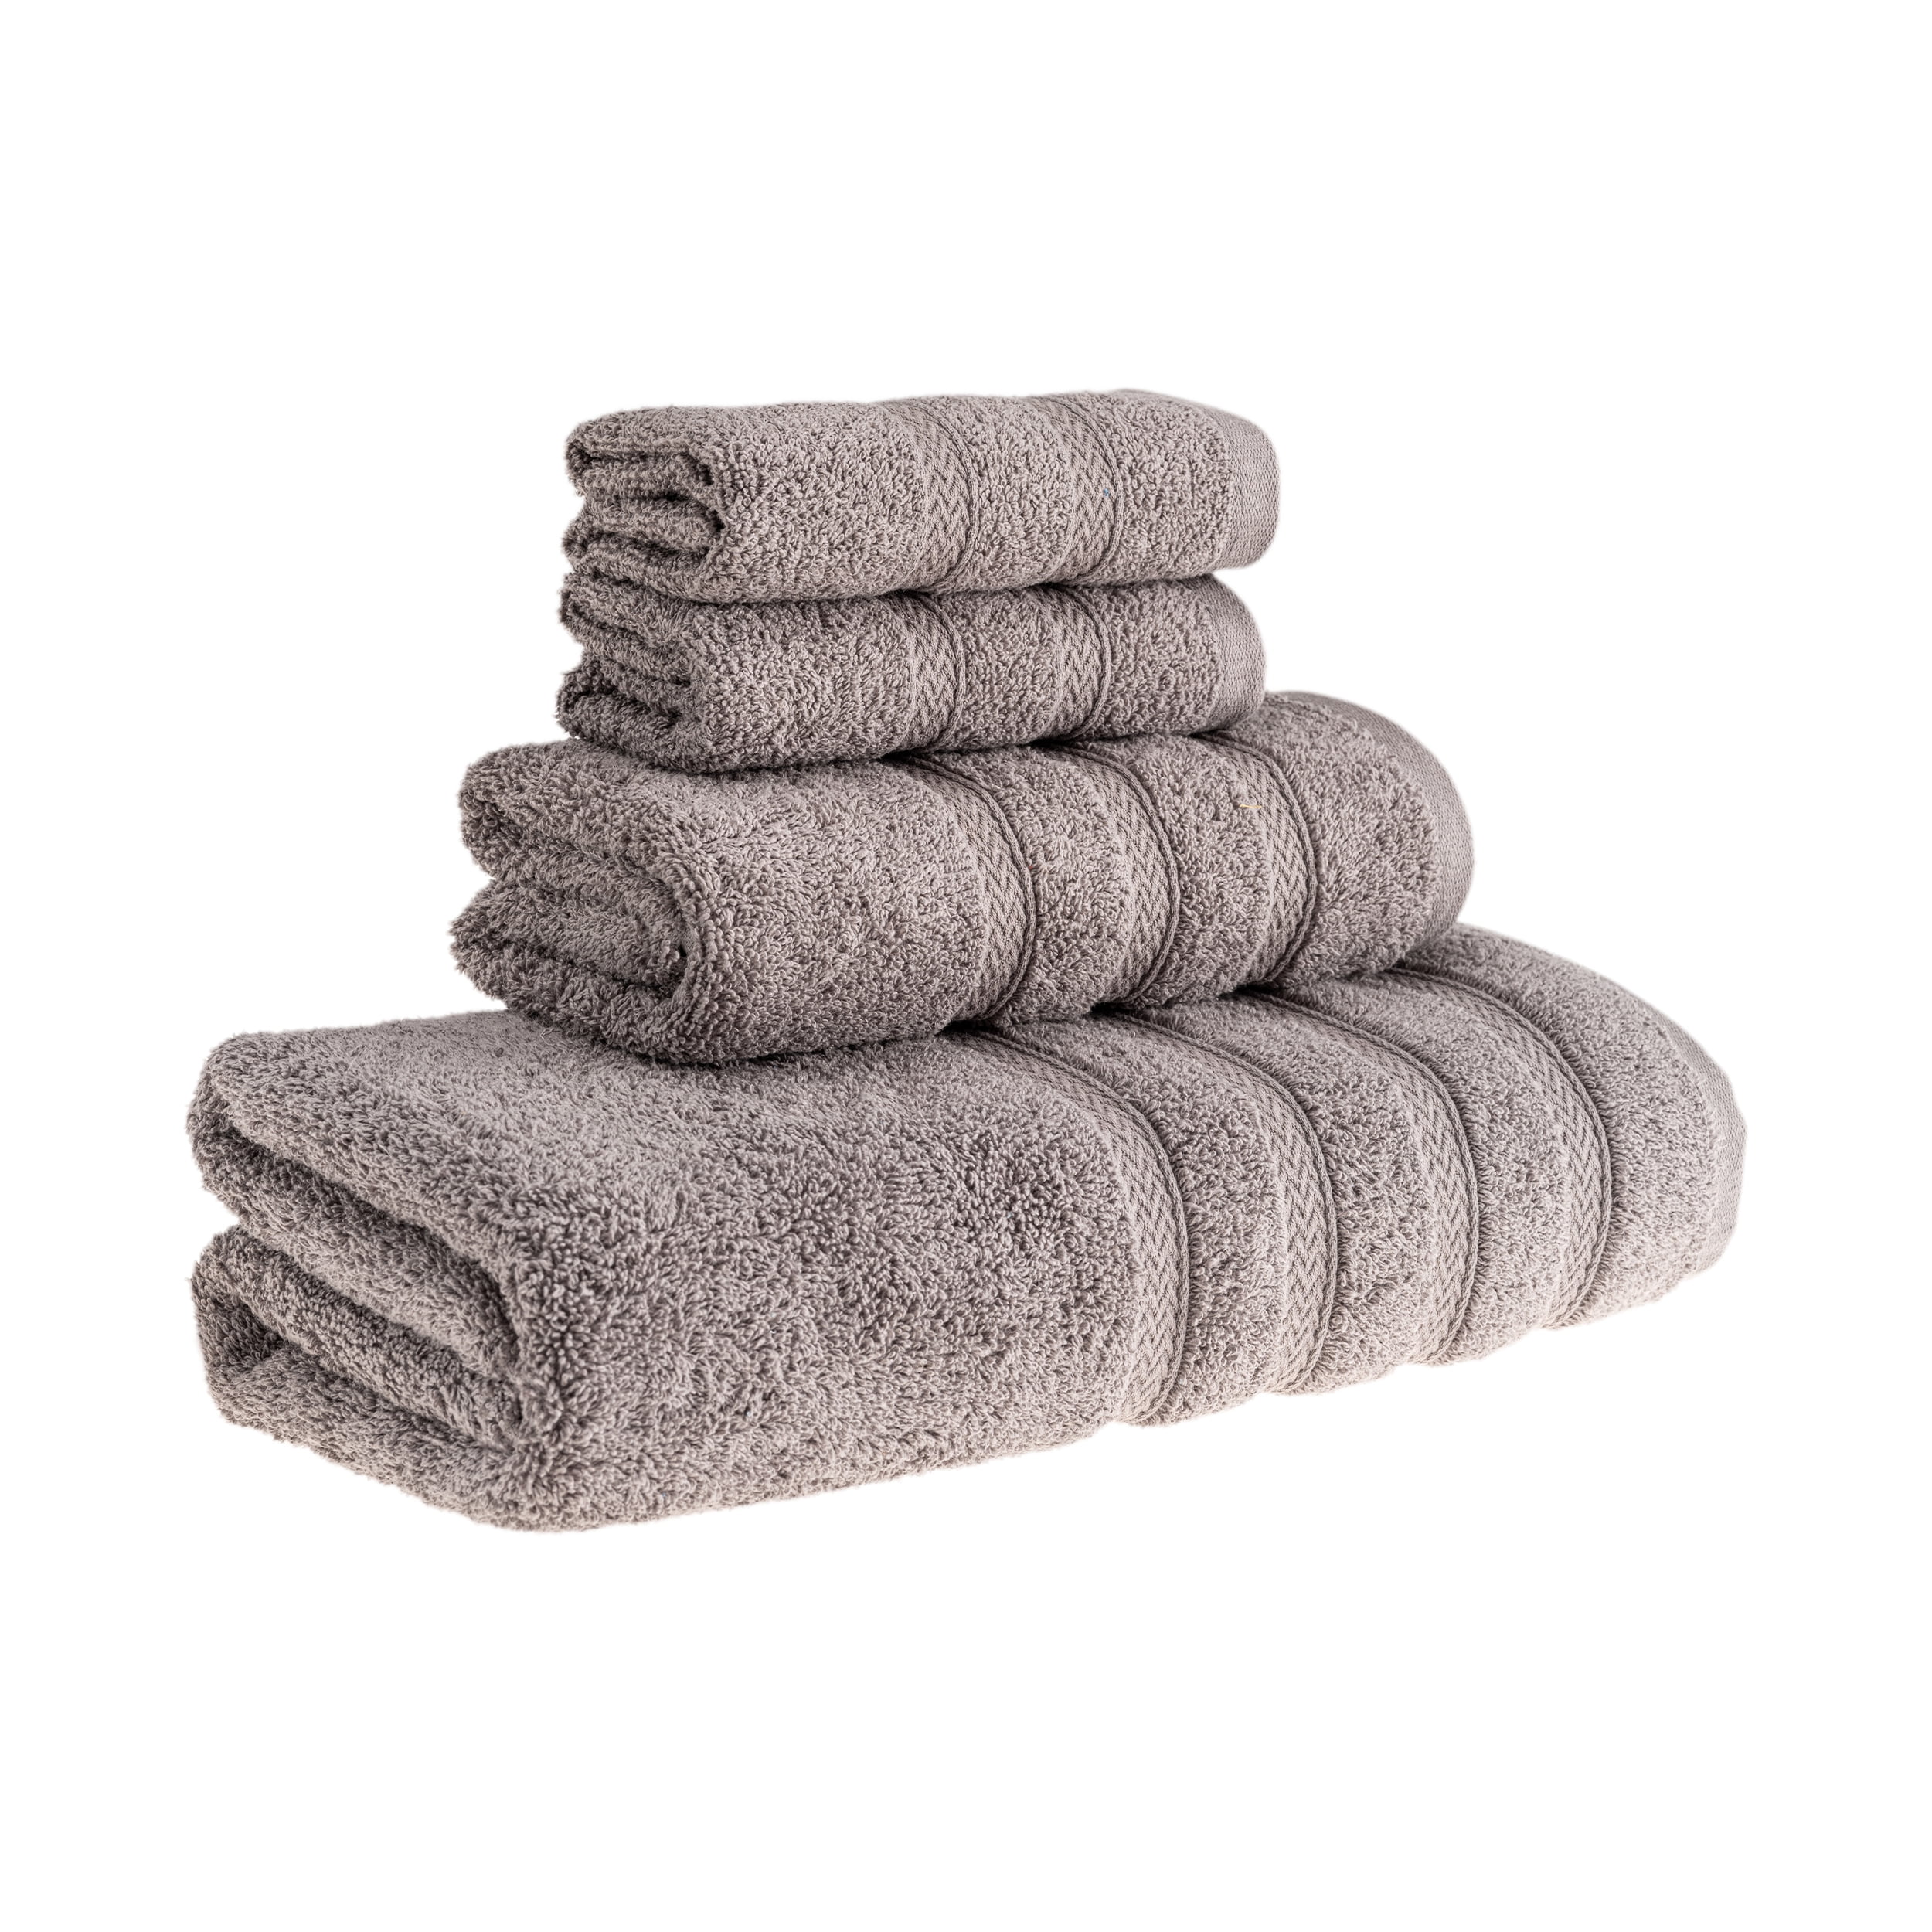 Turkish Grey Hand Towels for Bathroom Set of 4 - 18 X 40 inches